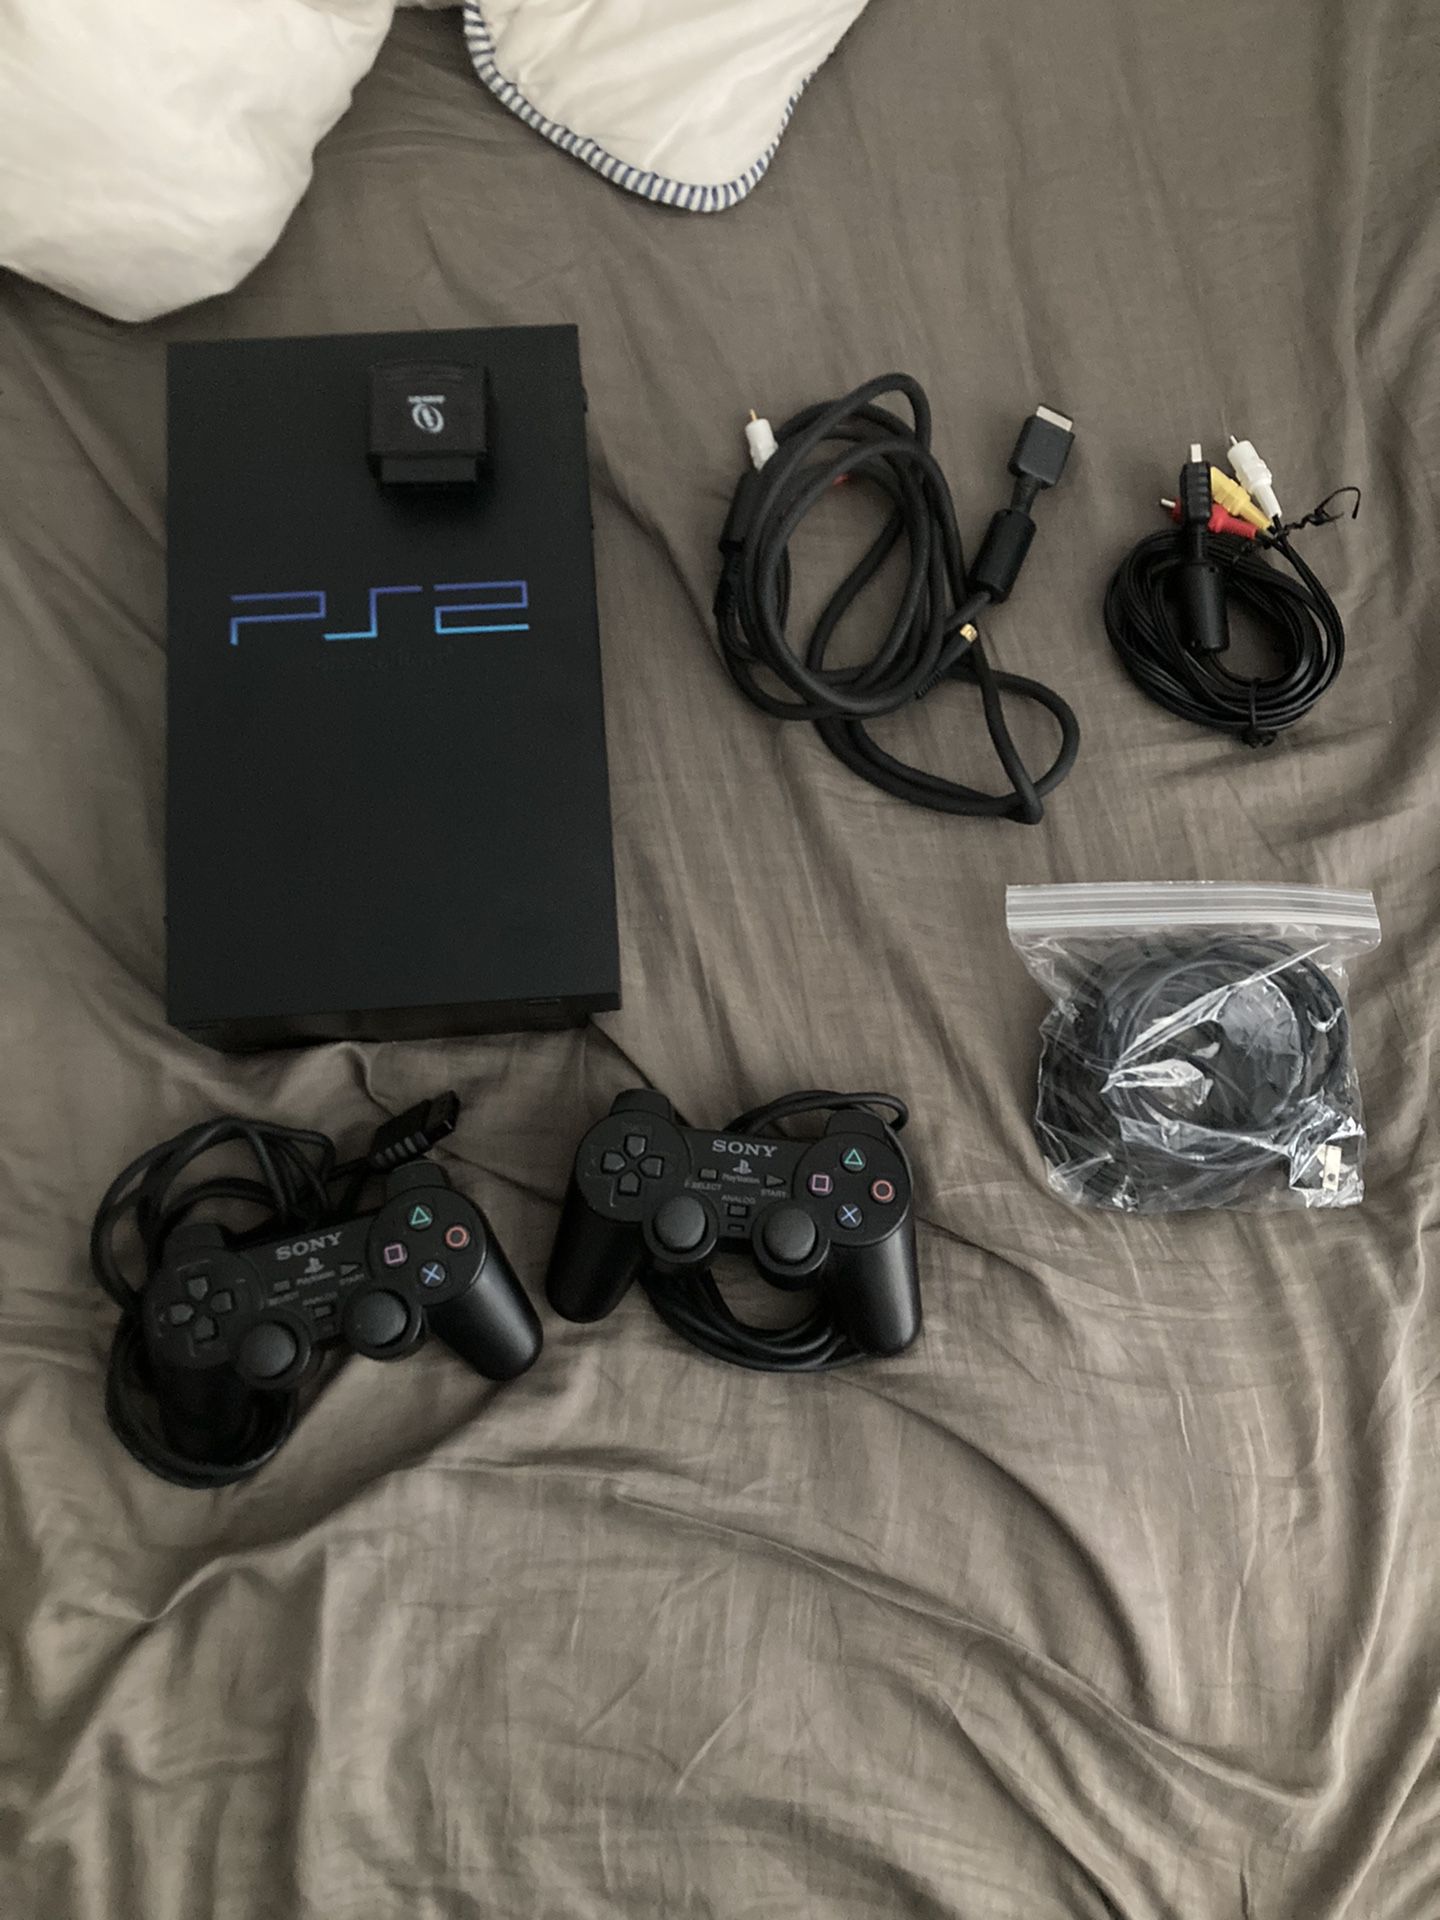 PLAYSTATION/PS2 CONSOLE, CONTROLLERS, CORDS, AND MEMORY CARD